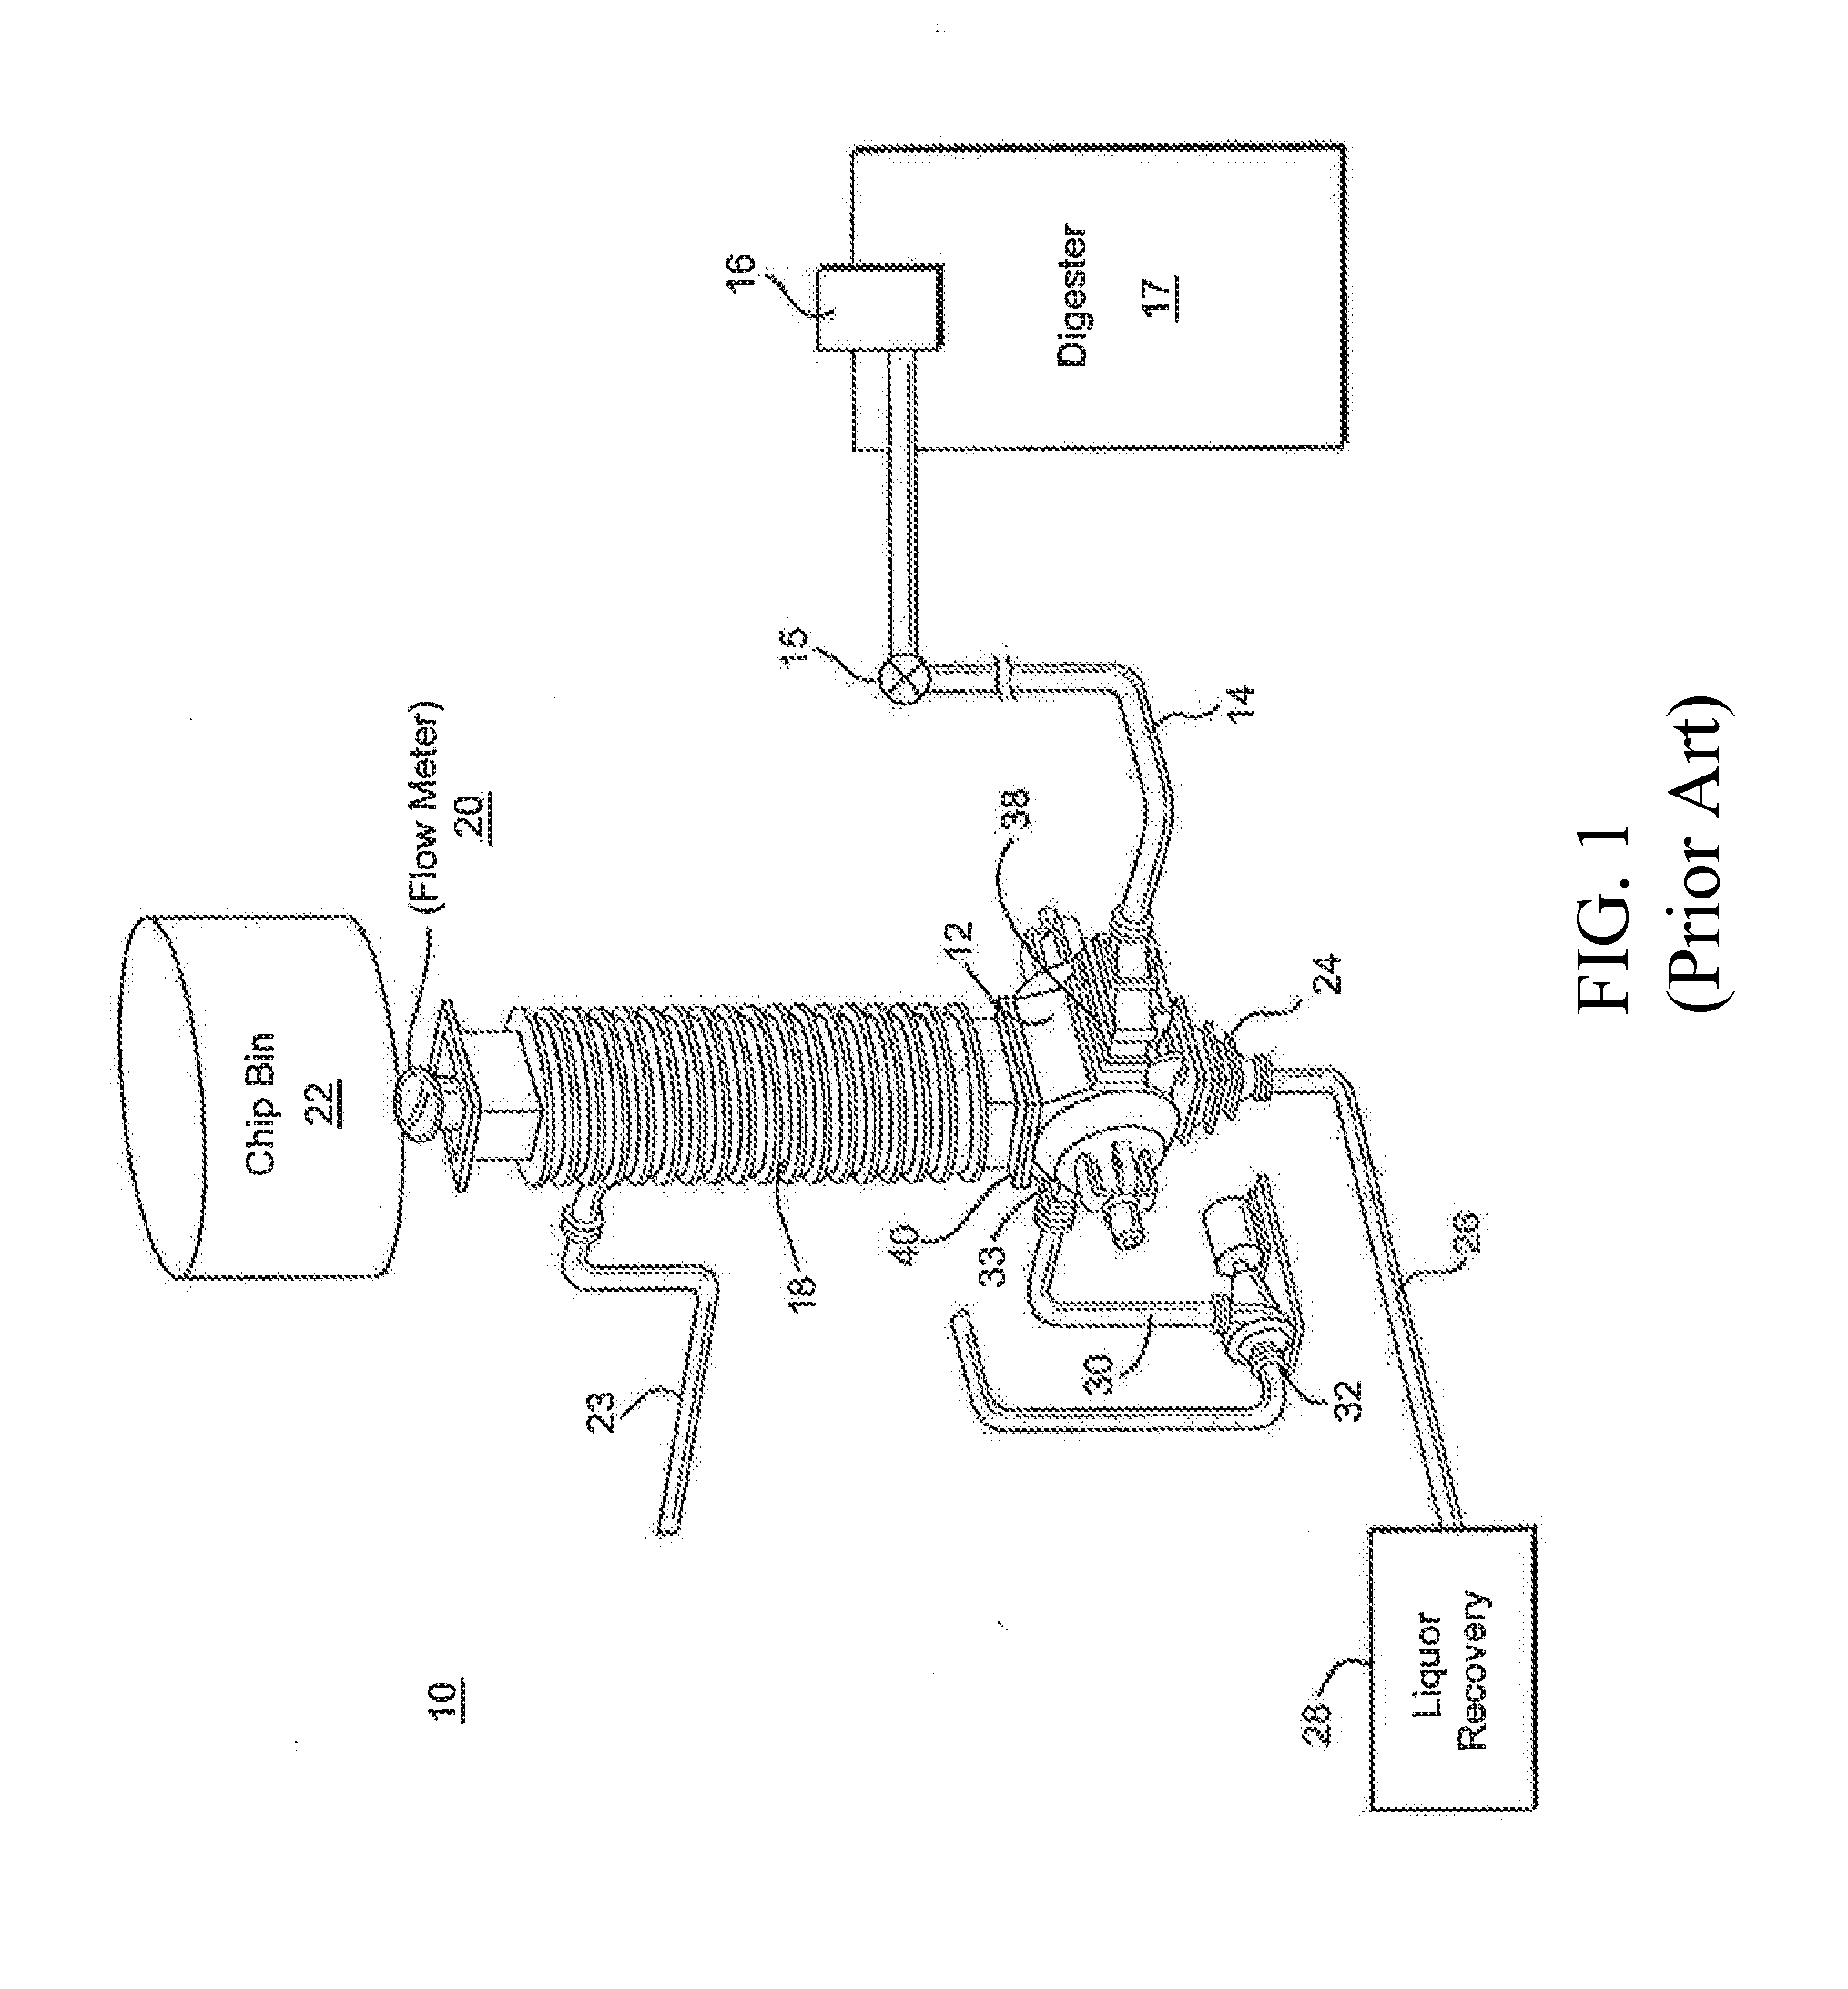 Adjustment housing assembly and monitoring and support system for a rotary feeder in a cellulose chip feeding system for a continuous digester